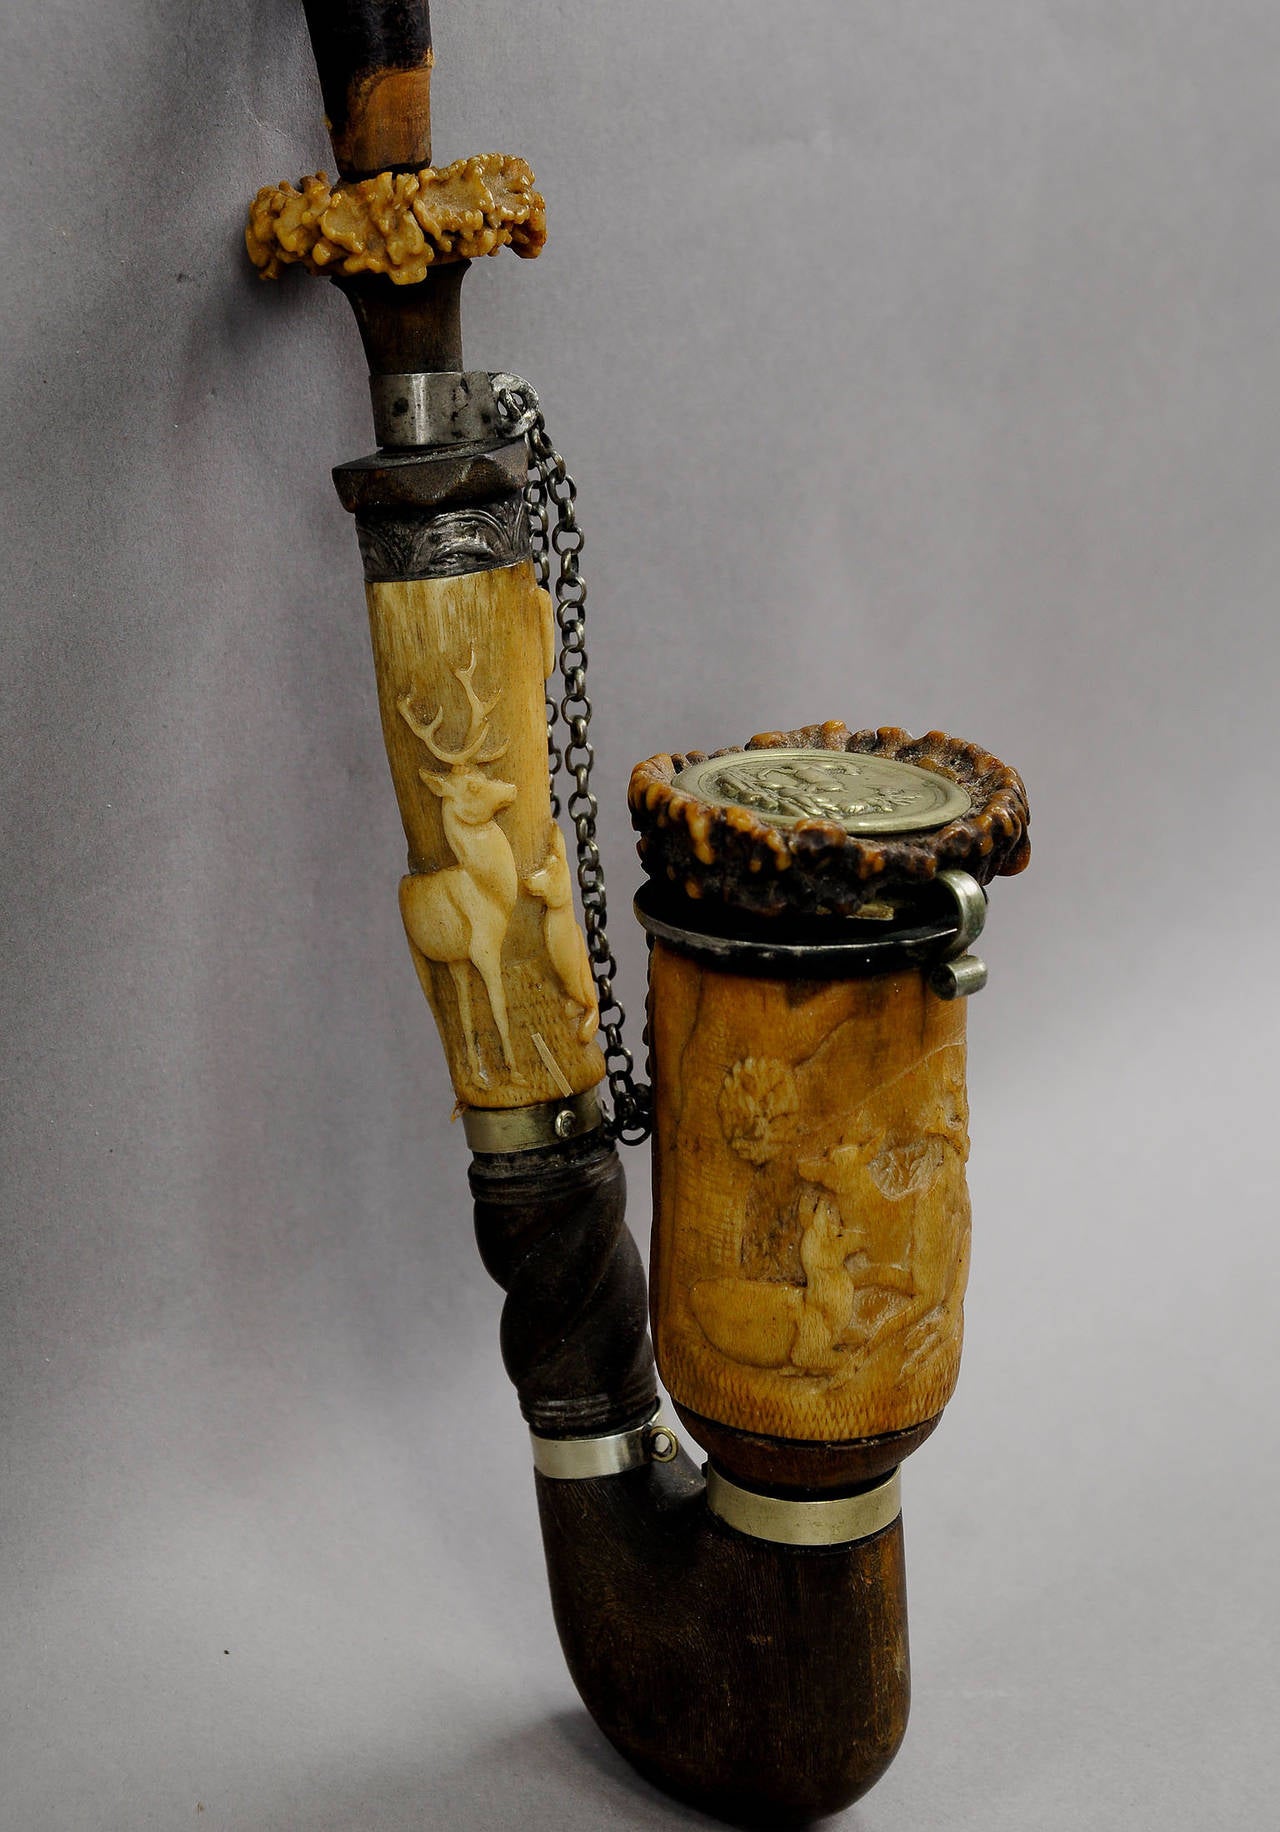 A wonderful antique tobacco pipe. Made of wood, horn roses and carved horn in high relief. the carving shows stags and roe deers. metalworking joints, one with hunting ornaments. A turned horn end as lid, decorated with a metal badge with deers in